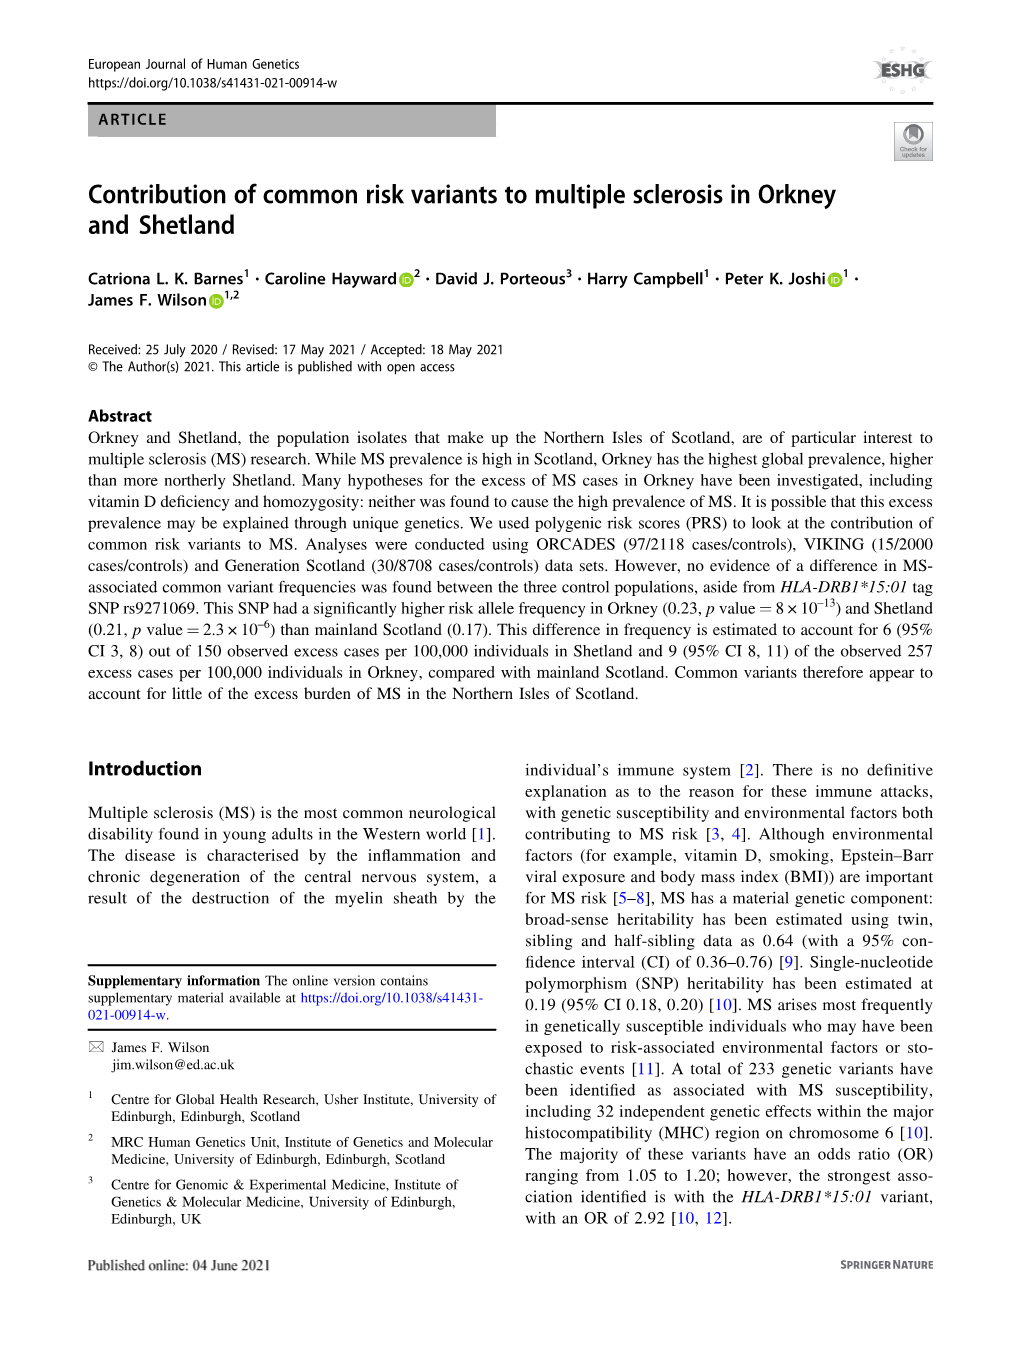 Contribution of Common Risk Variants to Multiple Sclerosis in Orkney and Shetland